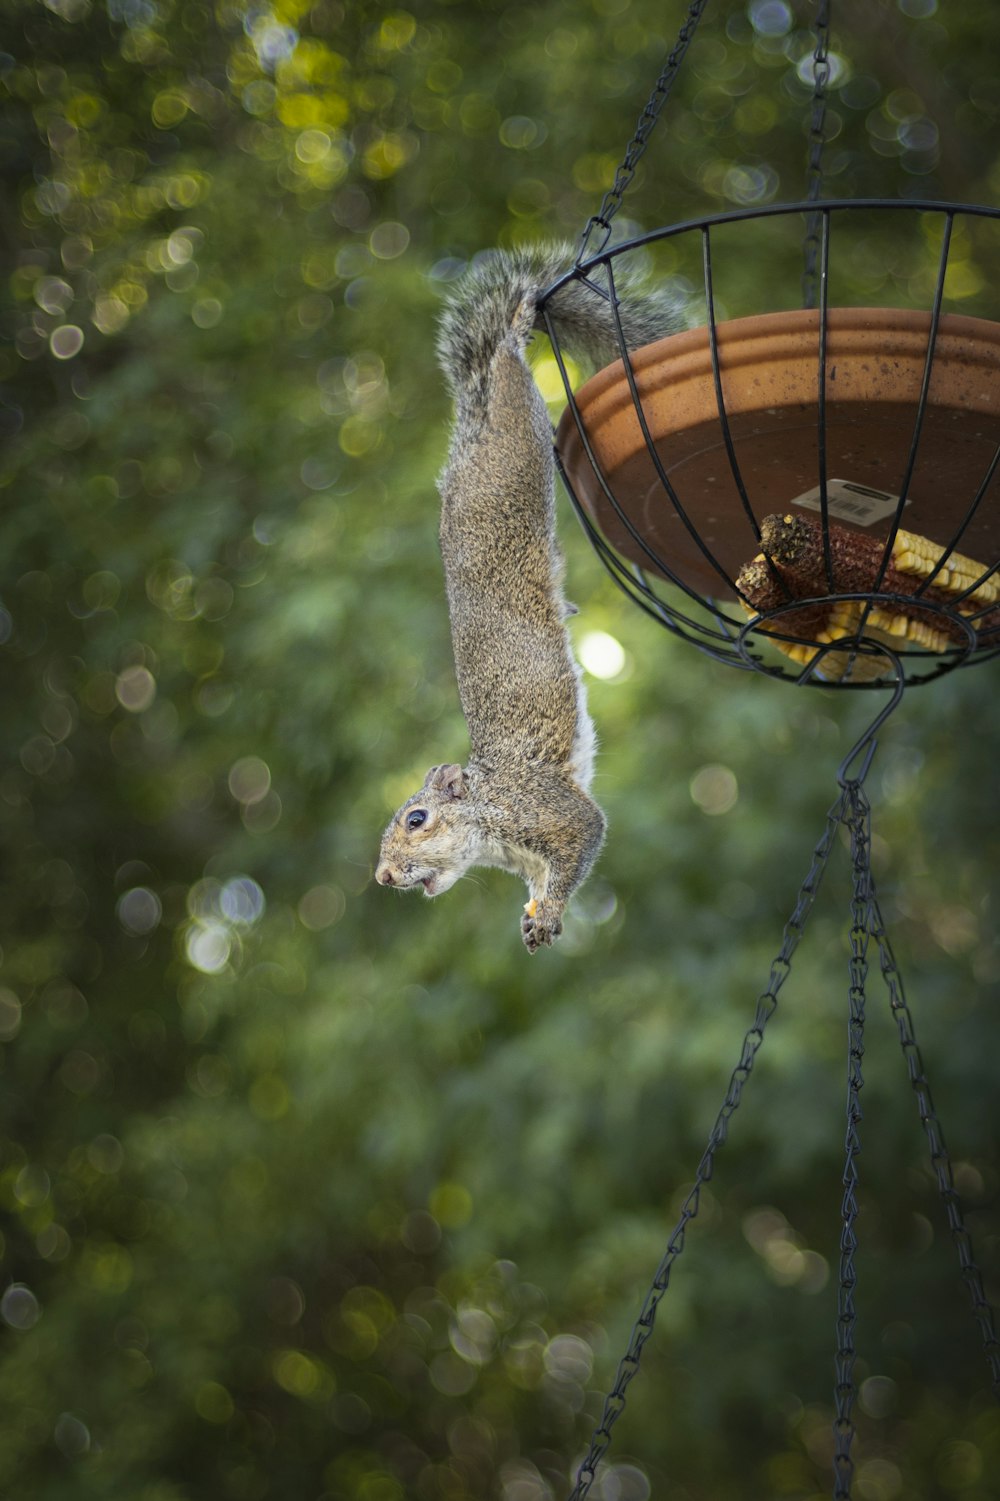 a squirrel eating from a bird feeder